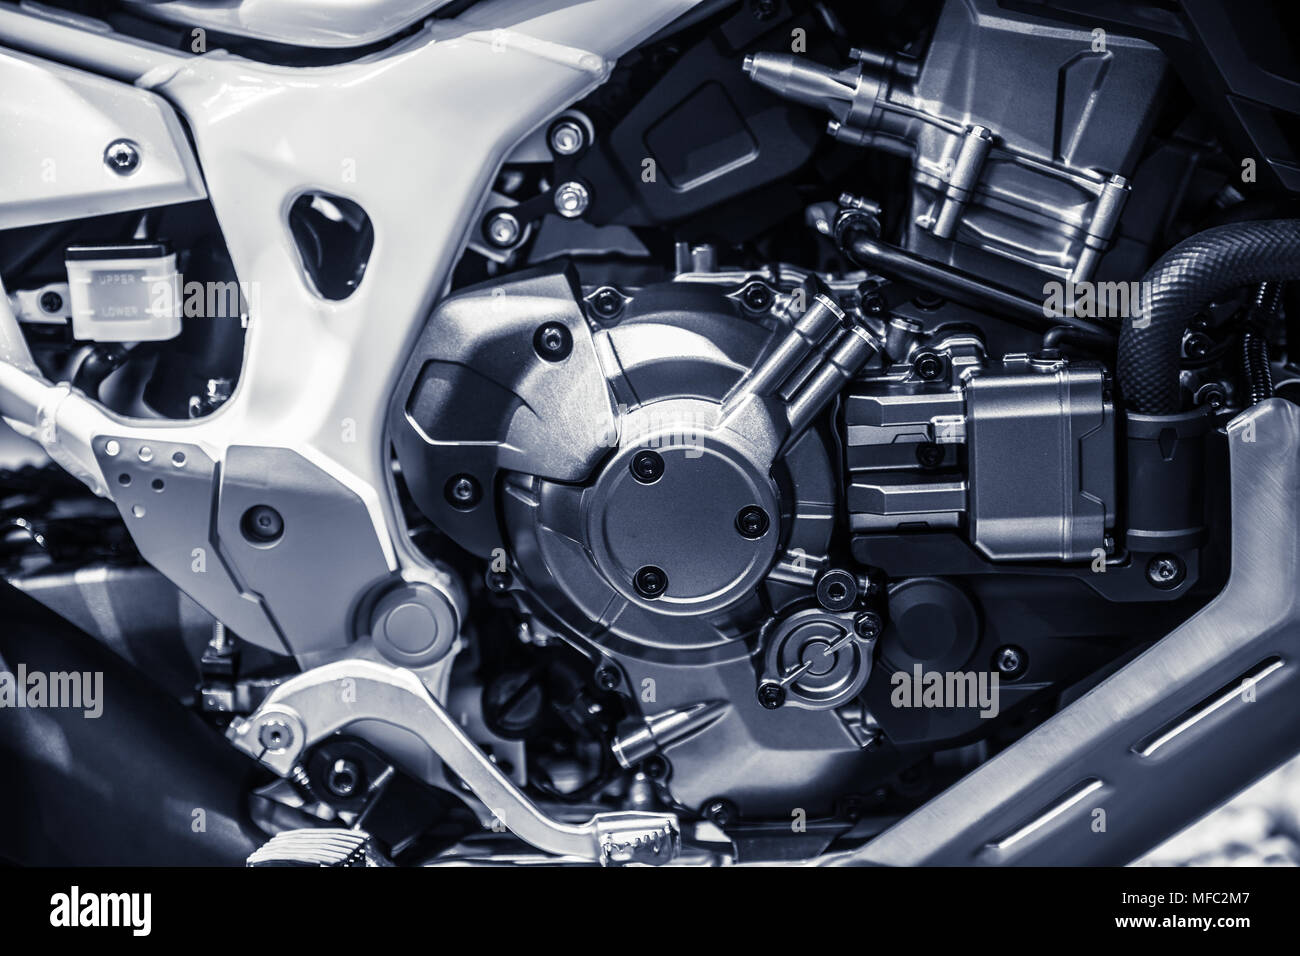 High Performance Motorcycle engine. Stock Photo